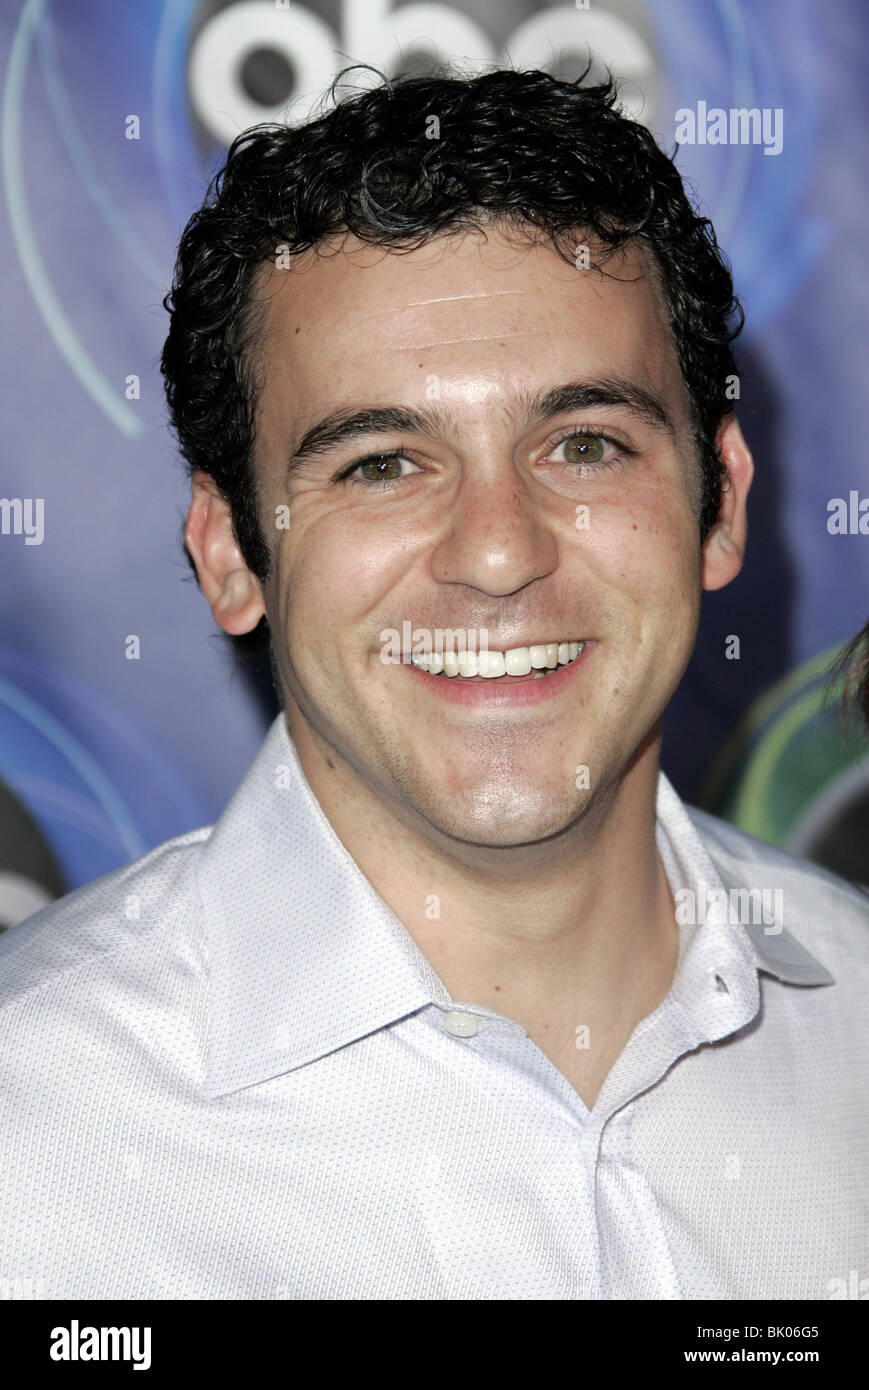 FRED SAVAGE ABC TV SUMMER PRESS TOUR PARTY THE ABBEY WEST HOLLYWOOD LA USA 27 July 2005 Stock Photo